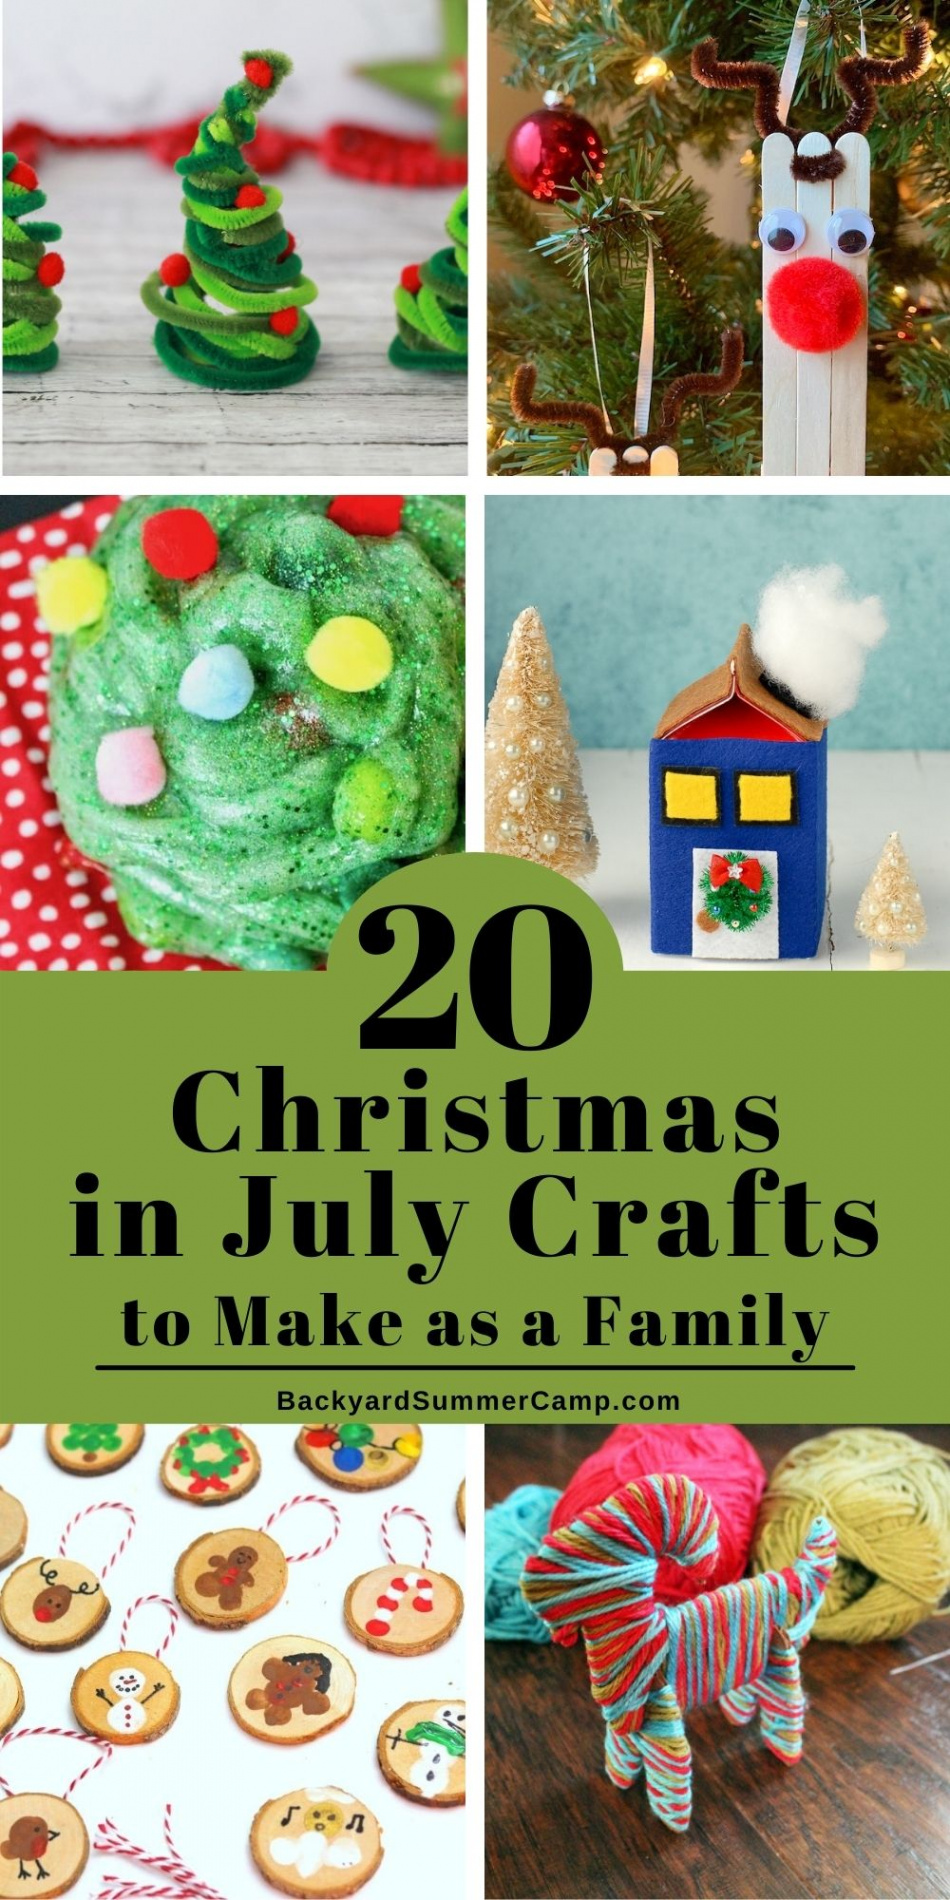 Christmas in July Crafts to Make as a Family- Backyard Summer Camp